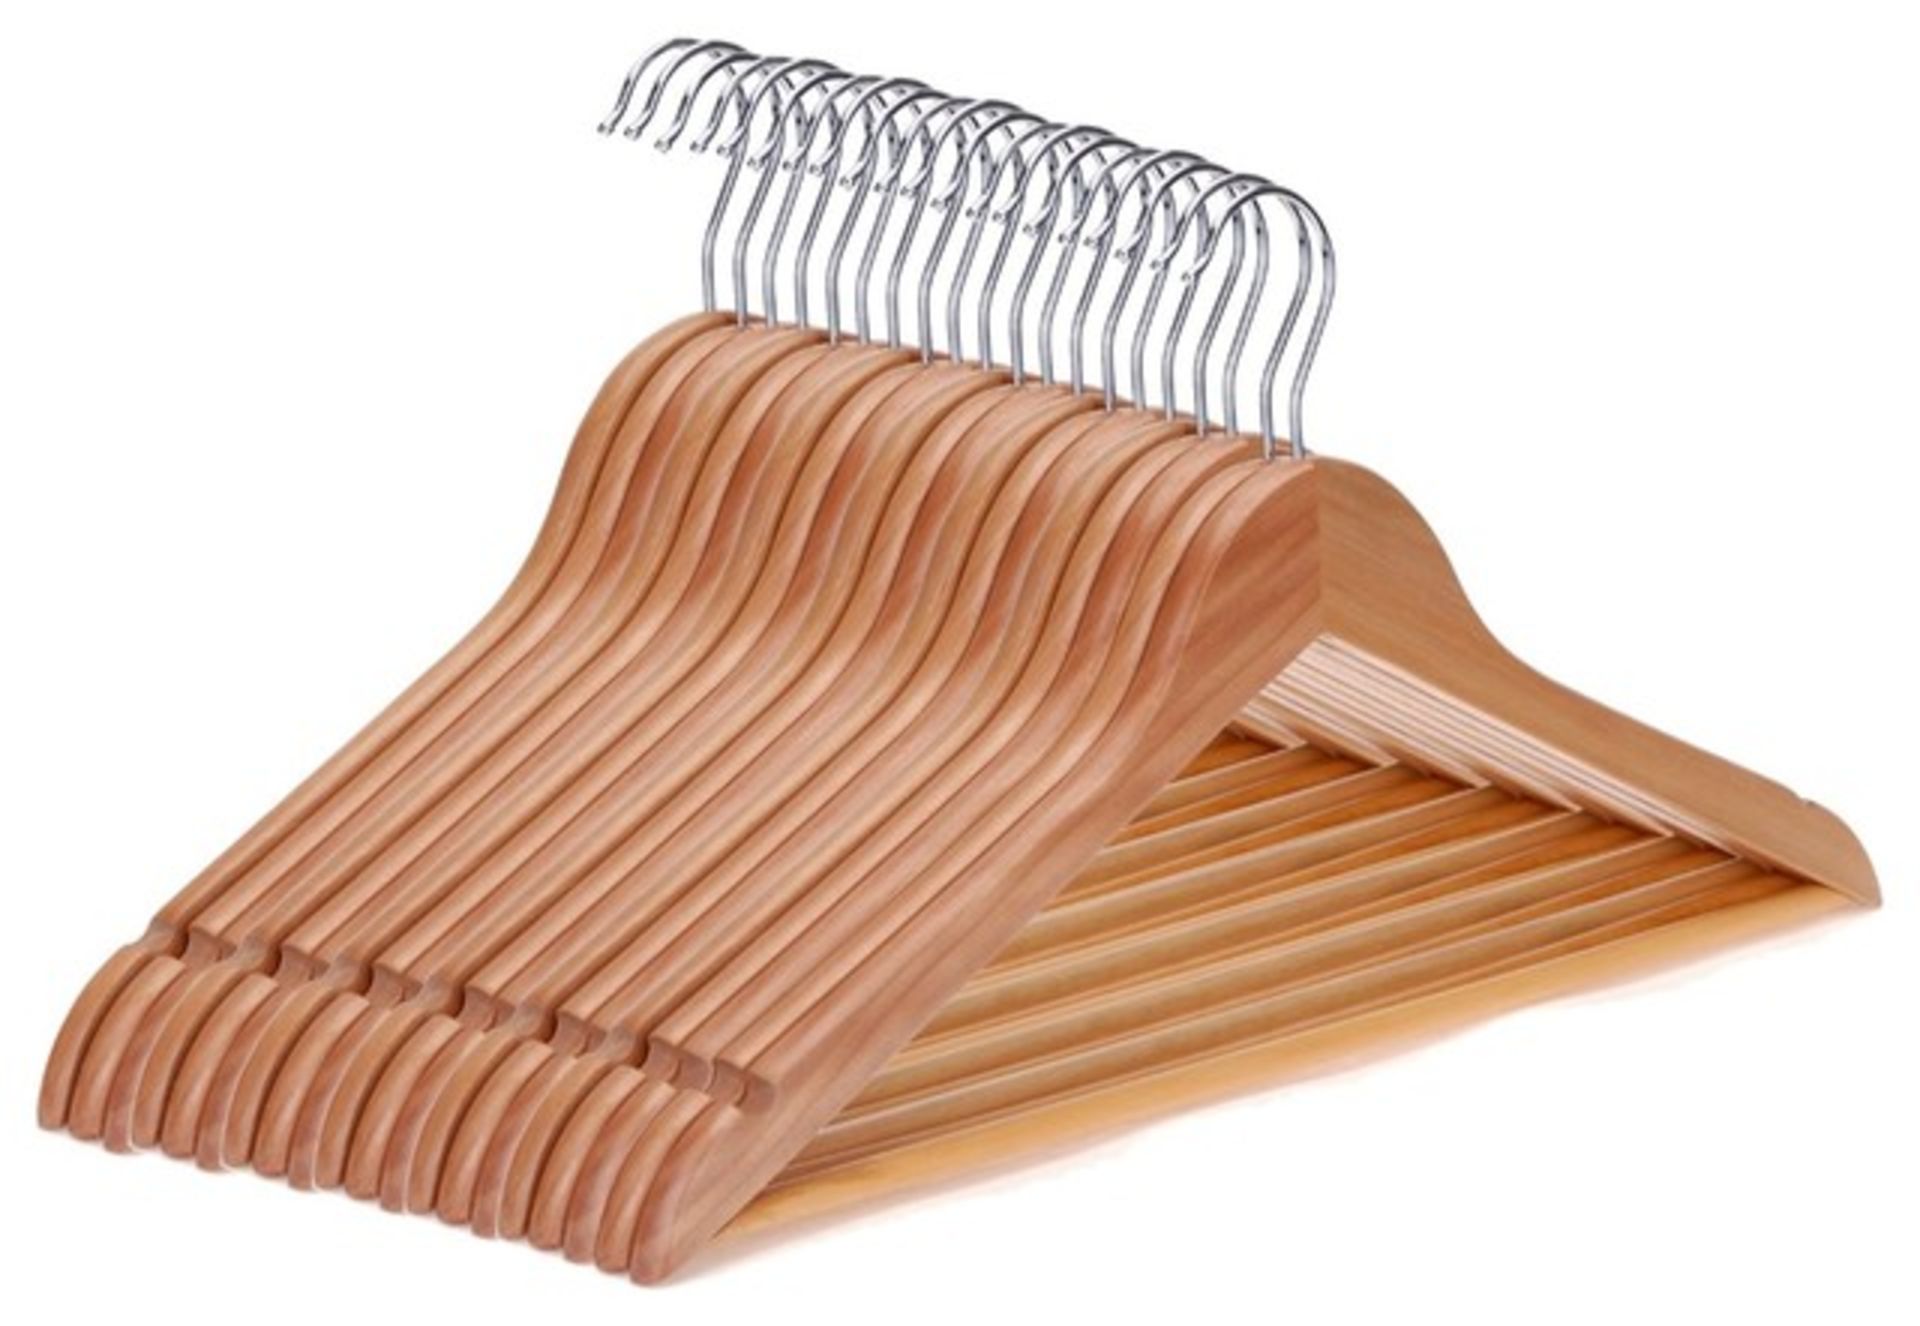 V Brand New Job Lot of 20 Wooden Clothes Hangers - ISP £17.70 (Shop Fitting Warehouse)